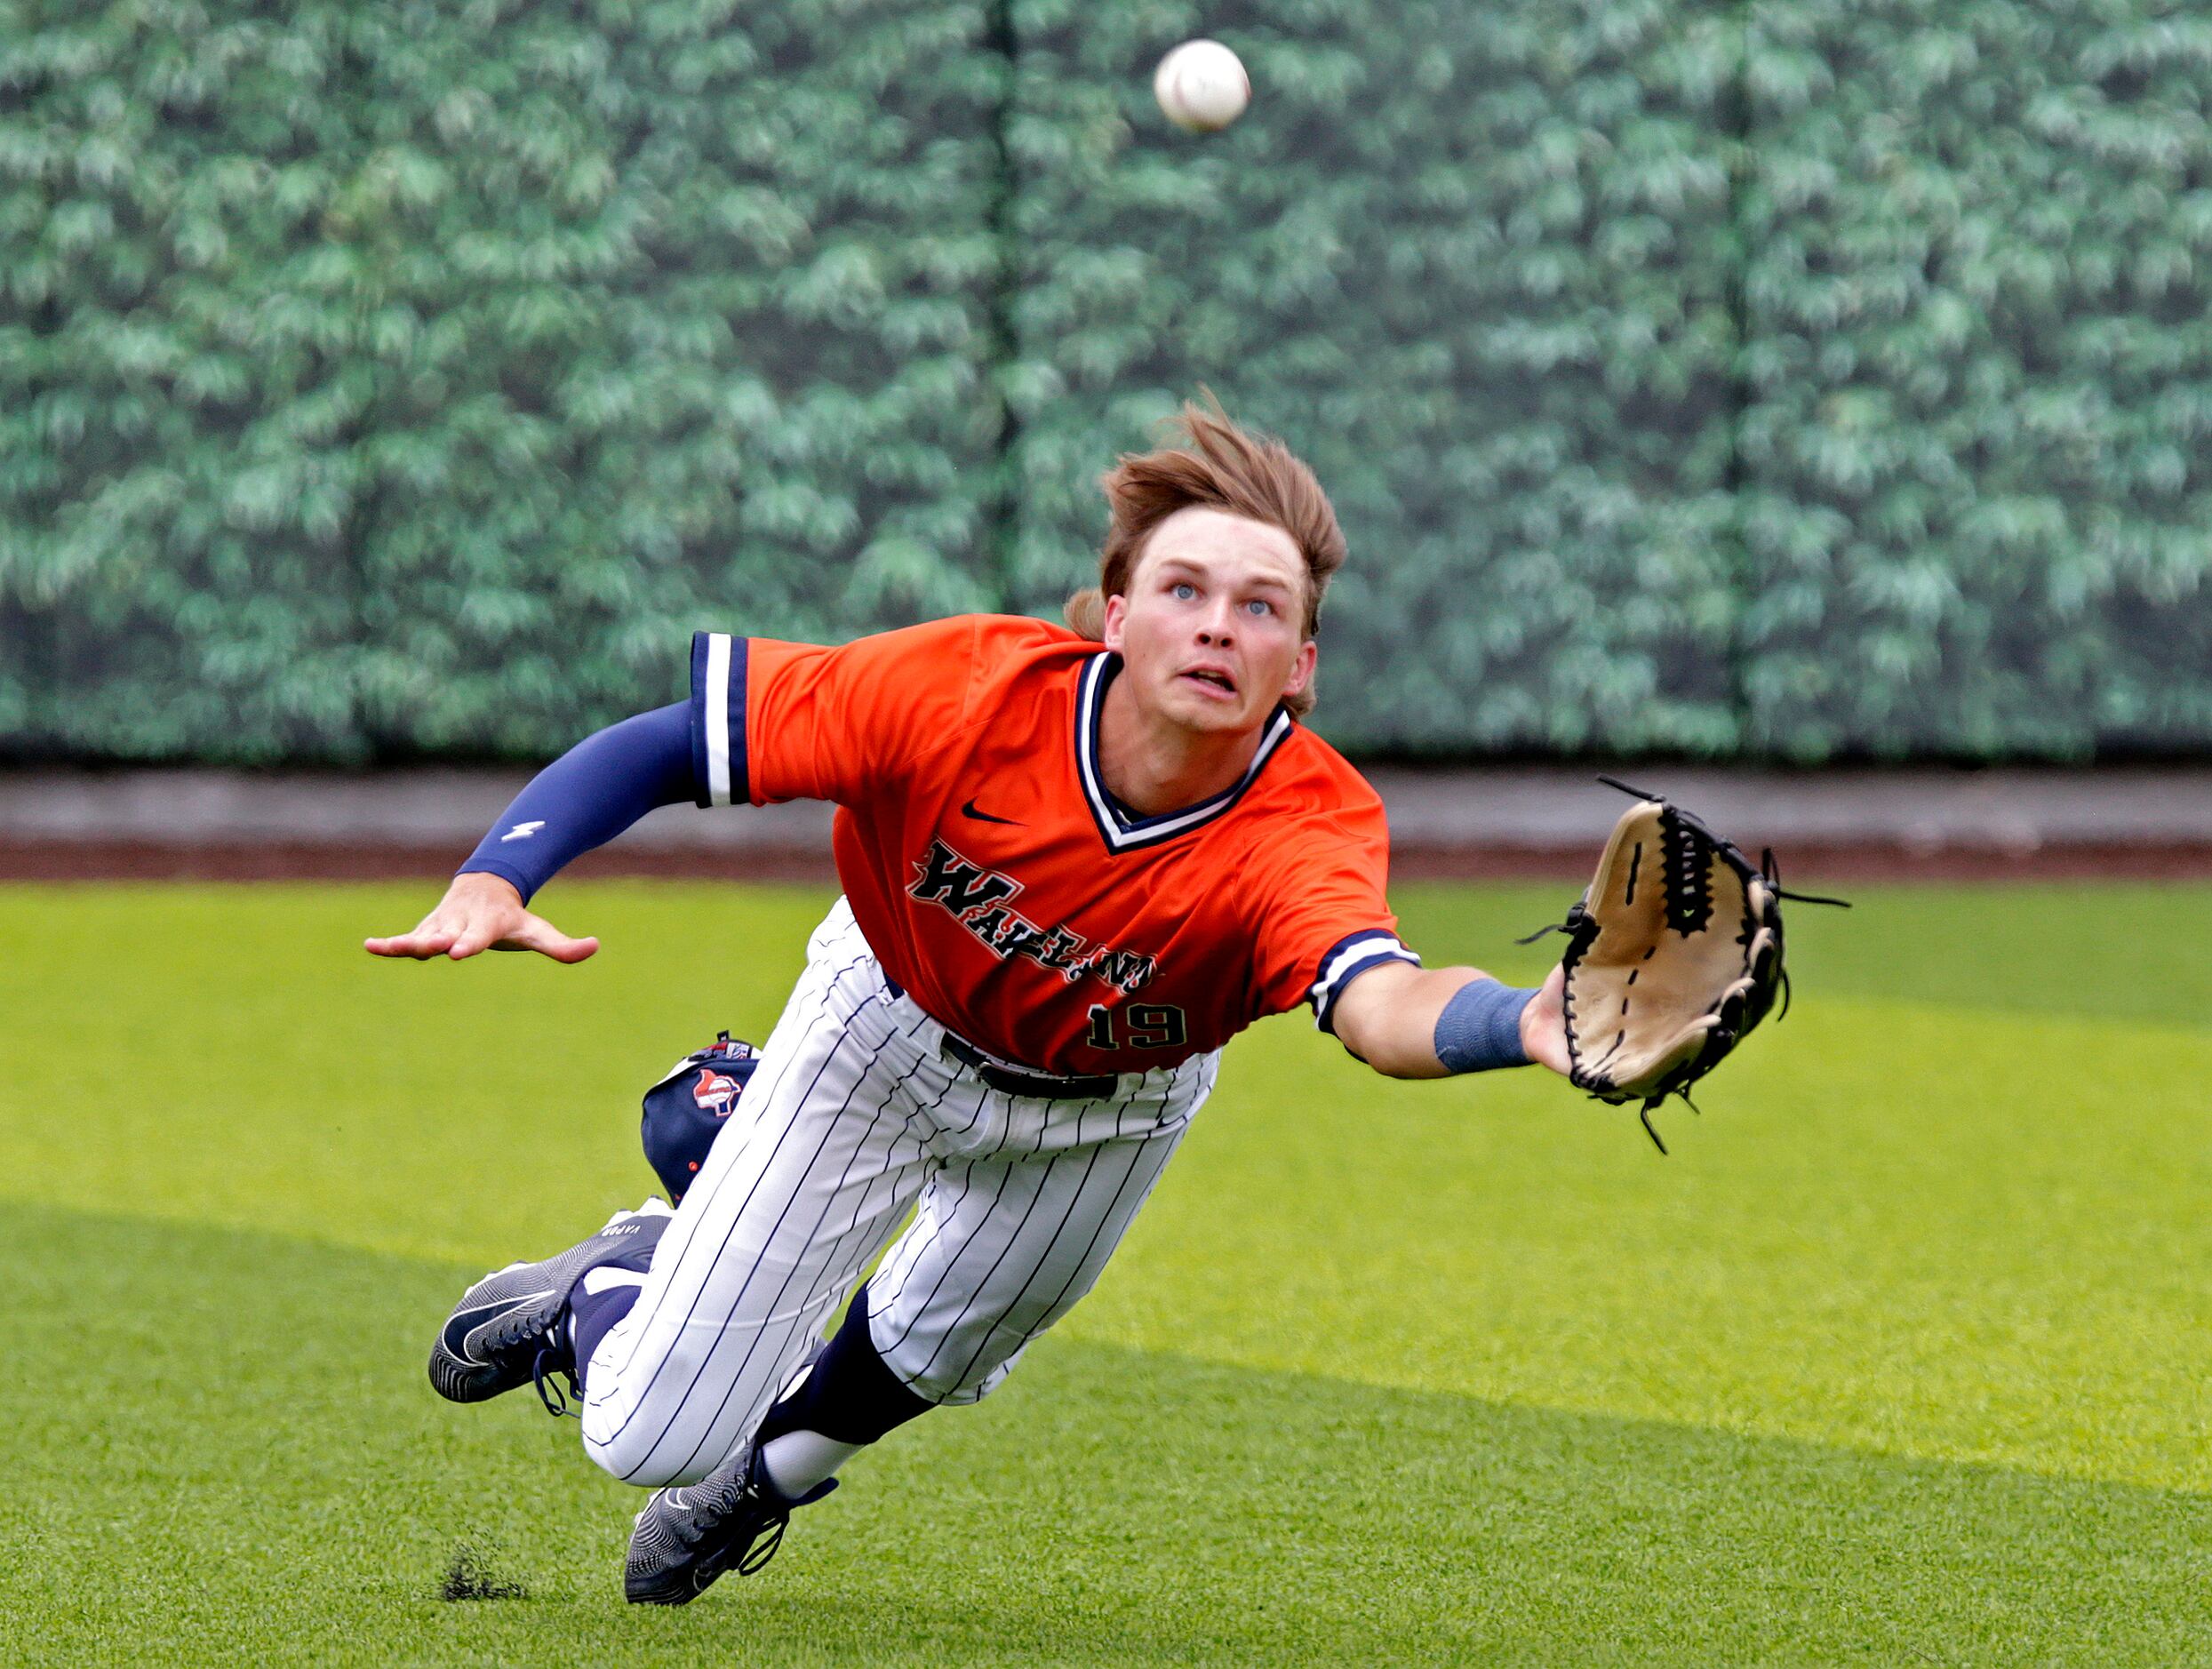 Wakelnad High School right fielder Brennan Myer (19) makes a diving catch to end the fifth...